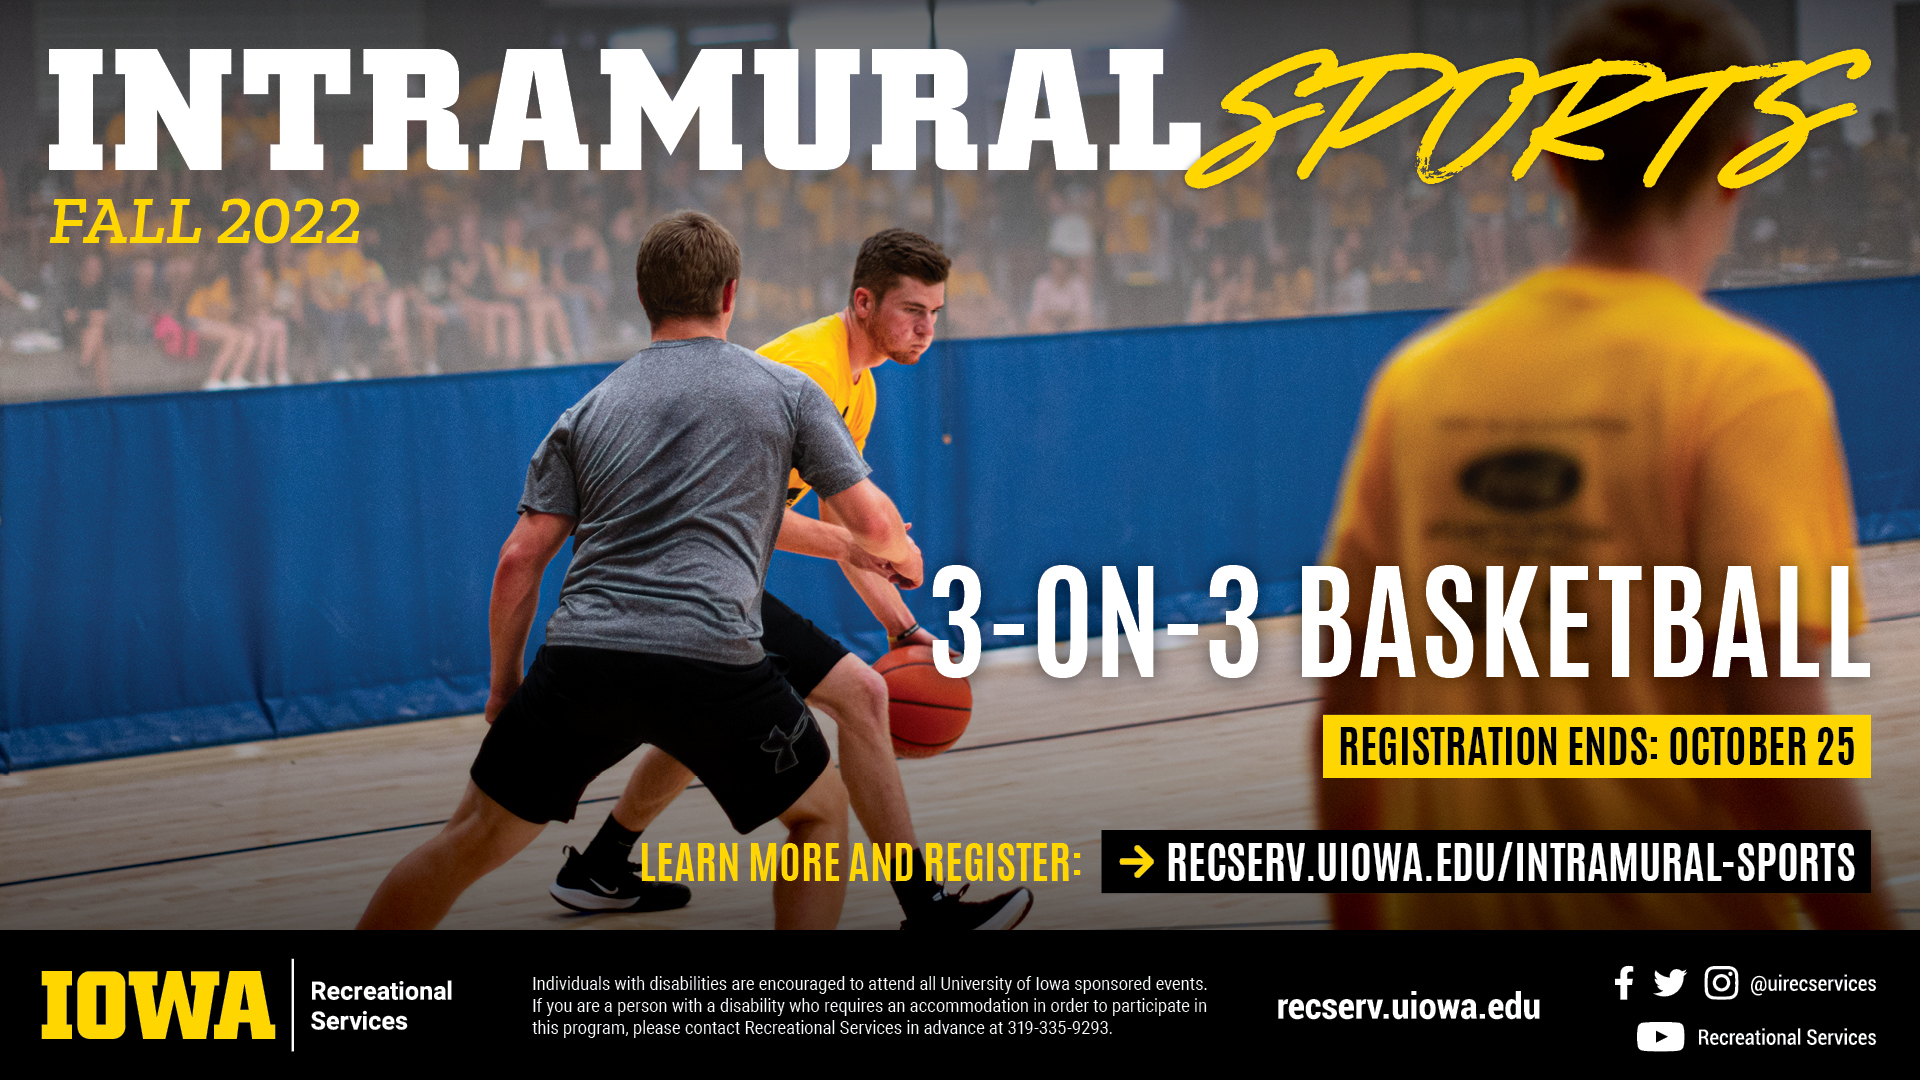 Intramural Sports Fall 2022: 3 on 3 Basketball. Learn more and register at reserv.uiowa.edu/intramural-sports